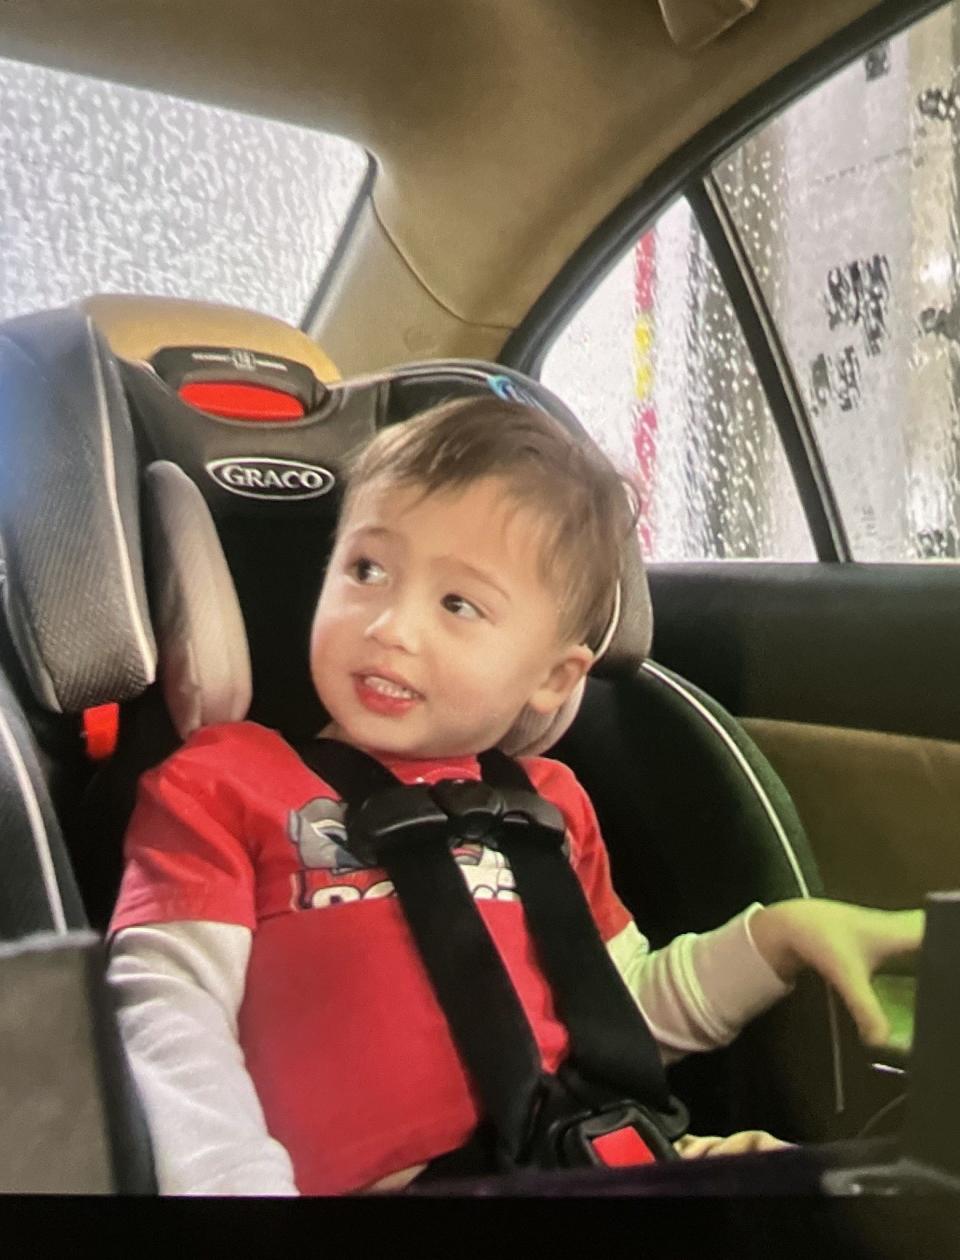 Elijah Vue, a 3-year-old boy from Two Rivers, Wisconsin has been missing since Tuesday, Feb. 20. The Two Rivers Police Department has asked the public for help finding him.